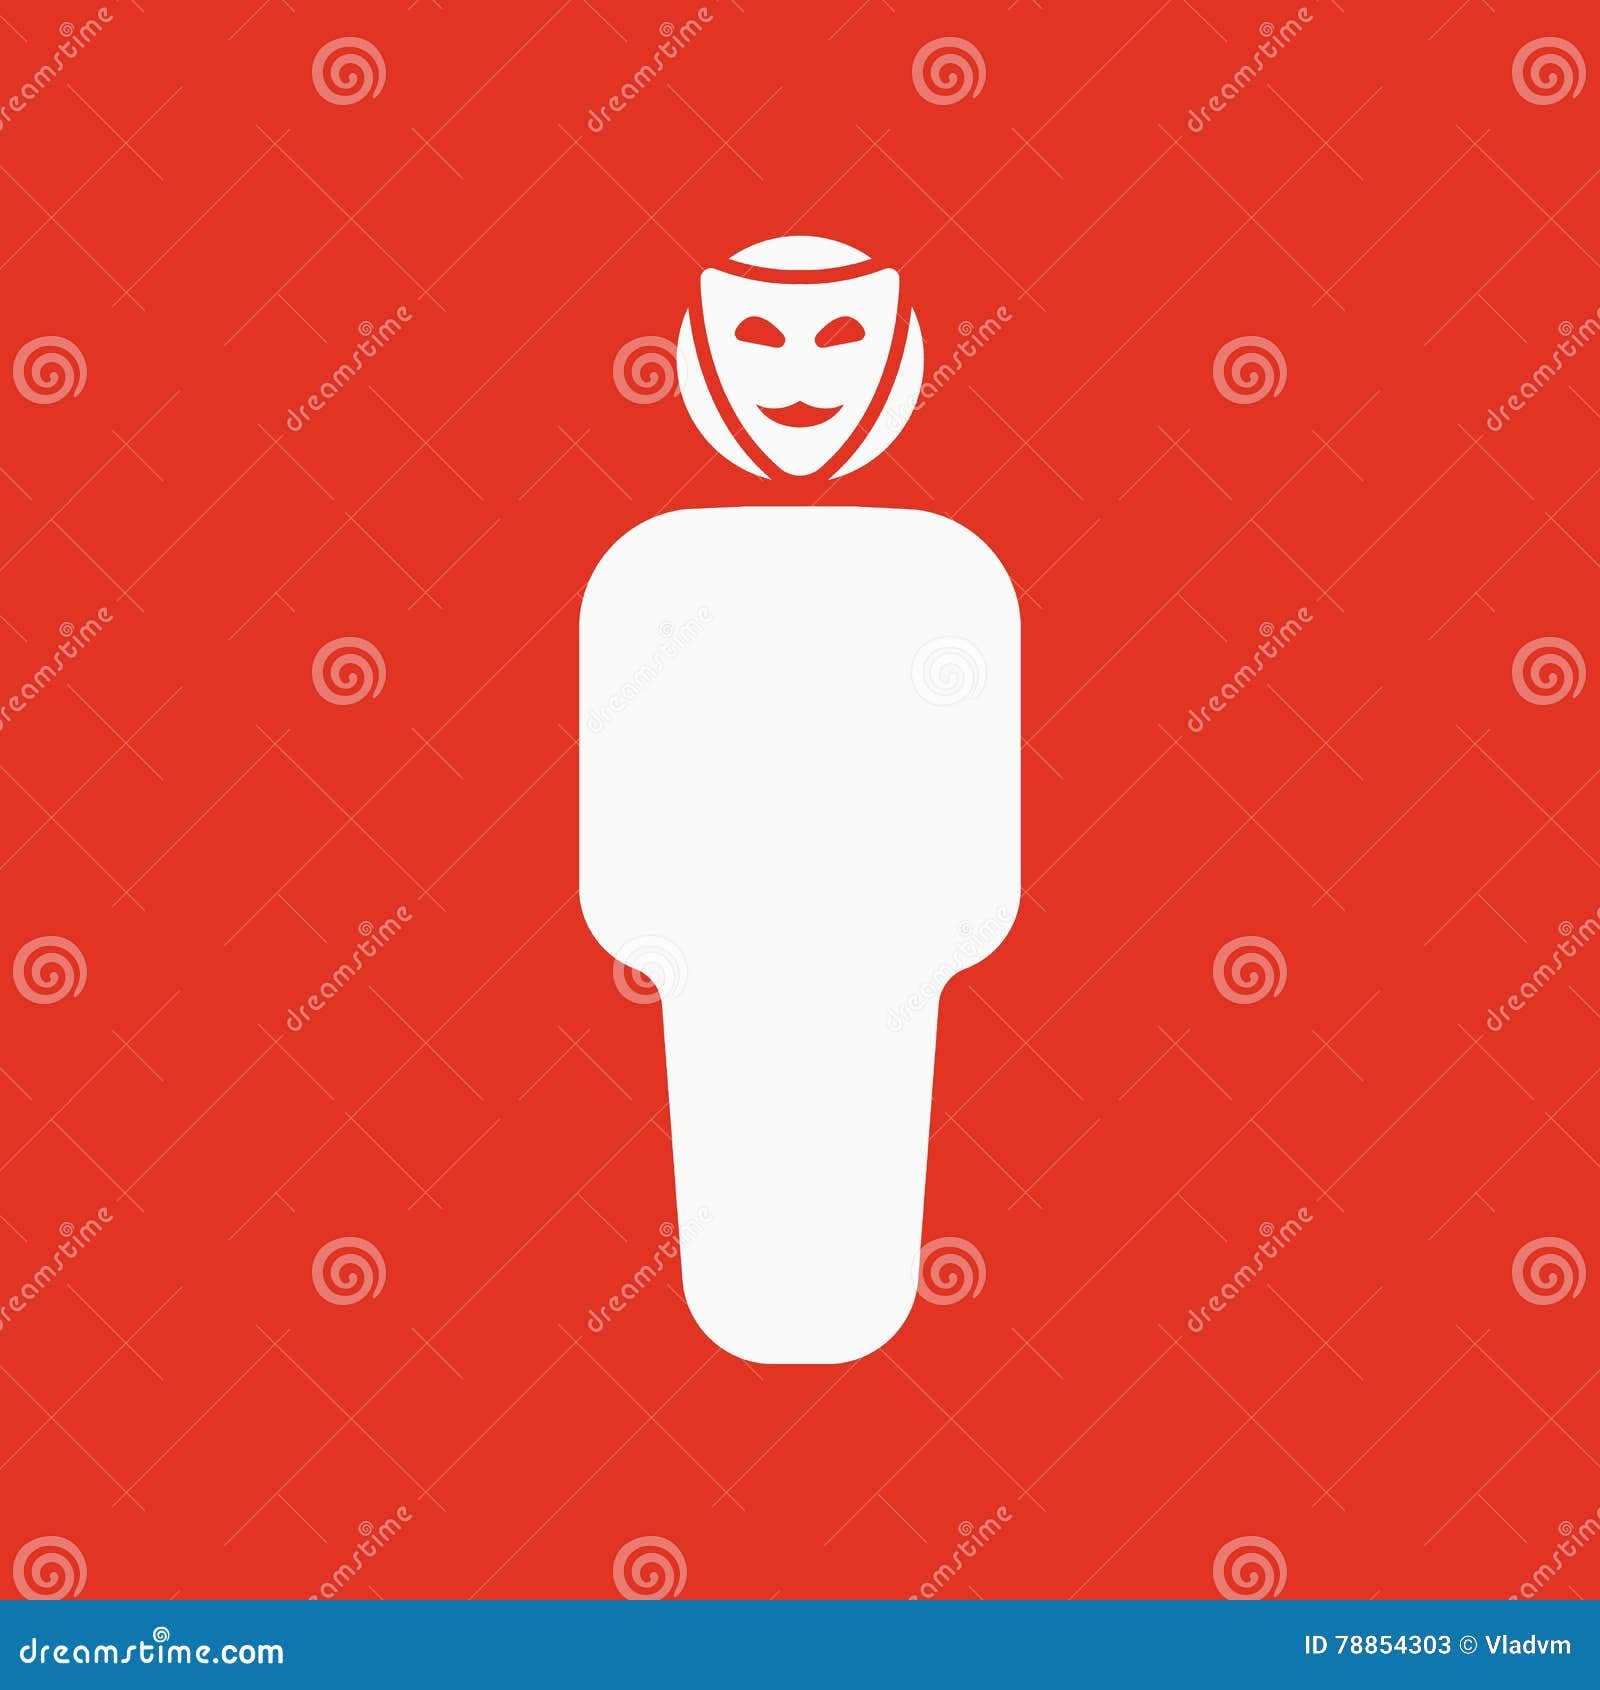 the anonym icon. unknown and faceless, impersonal, featureless . flat